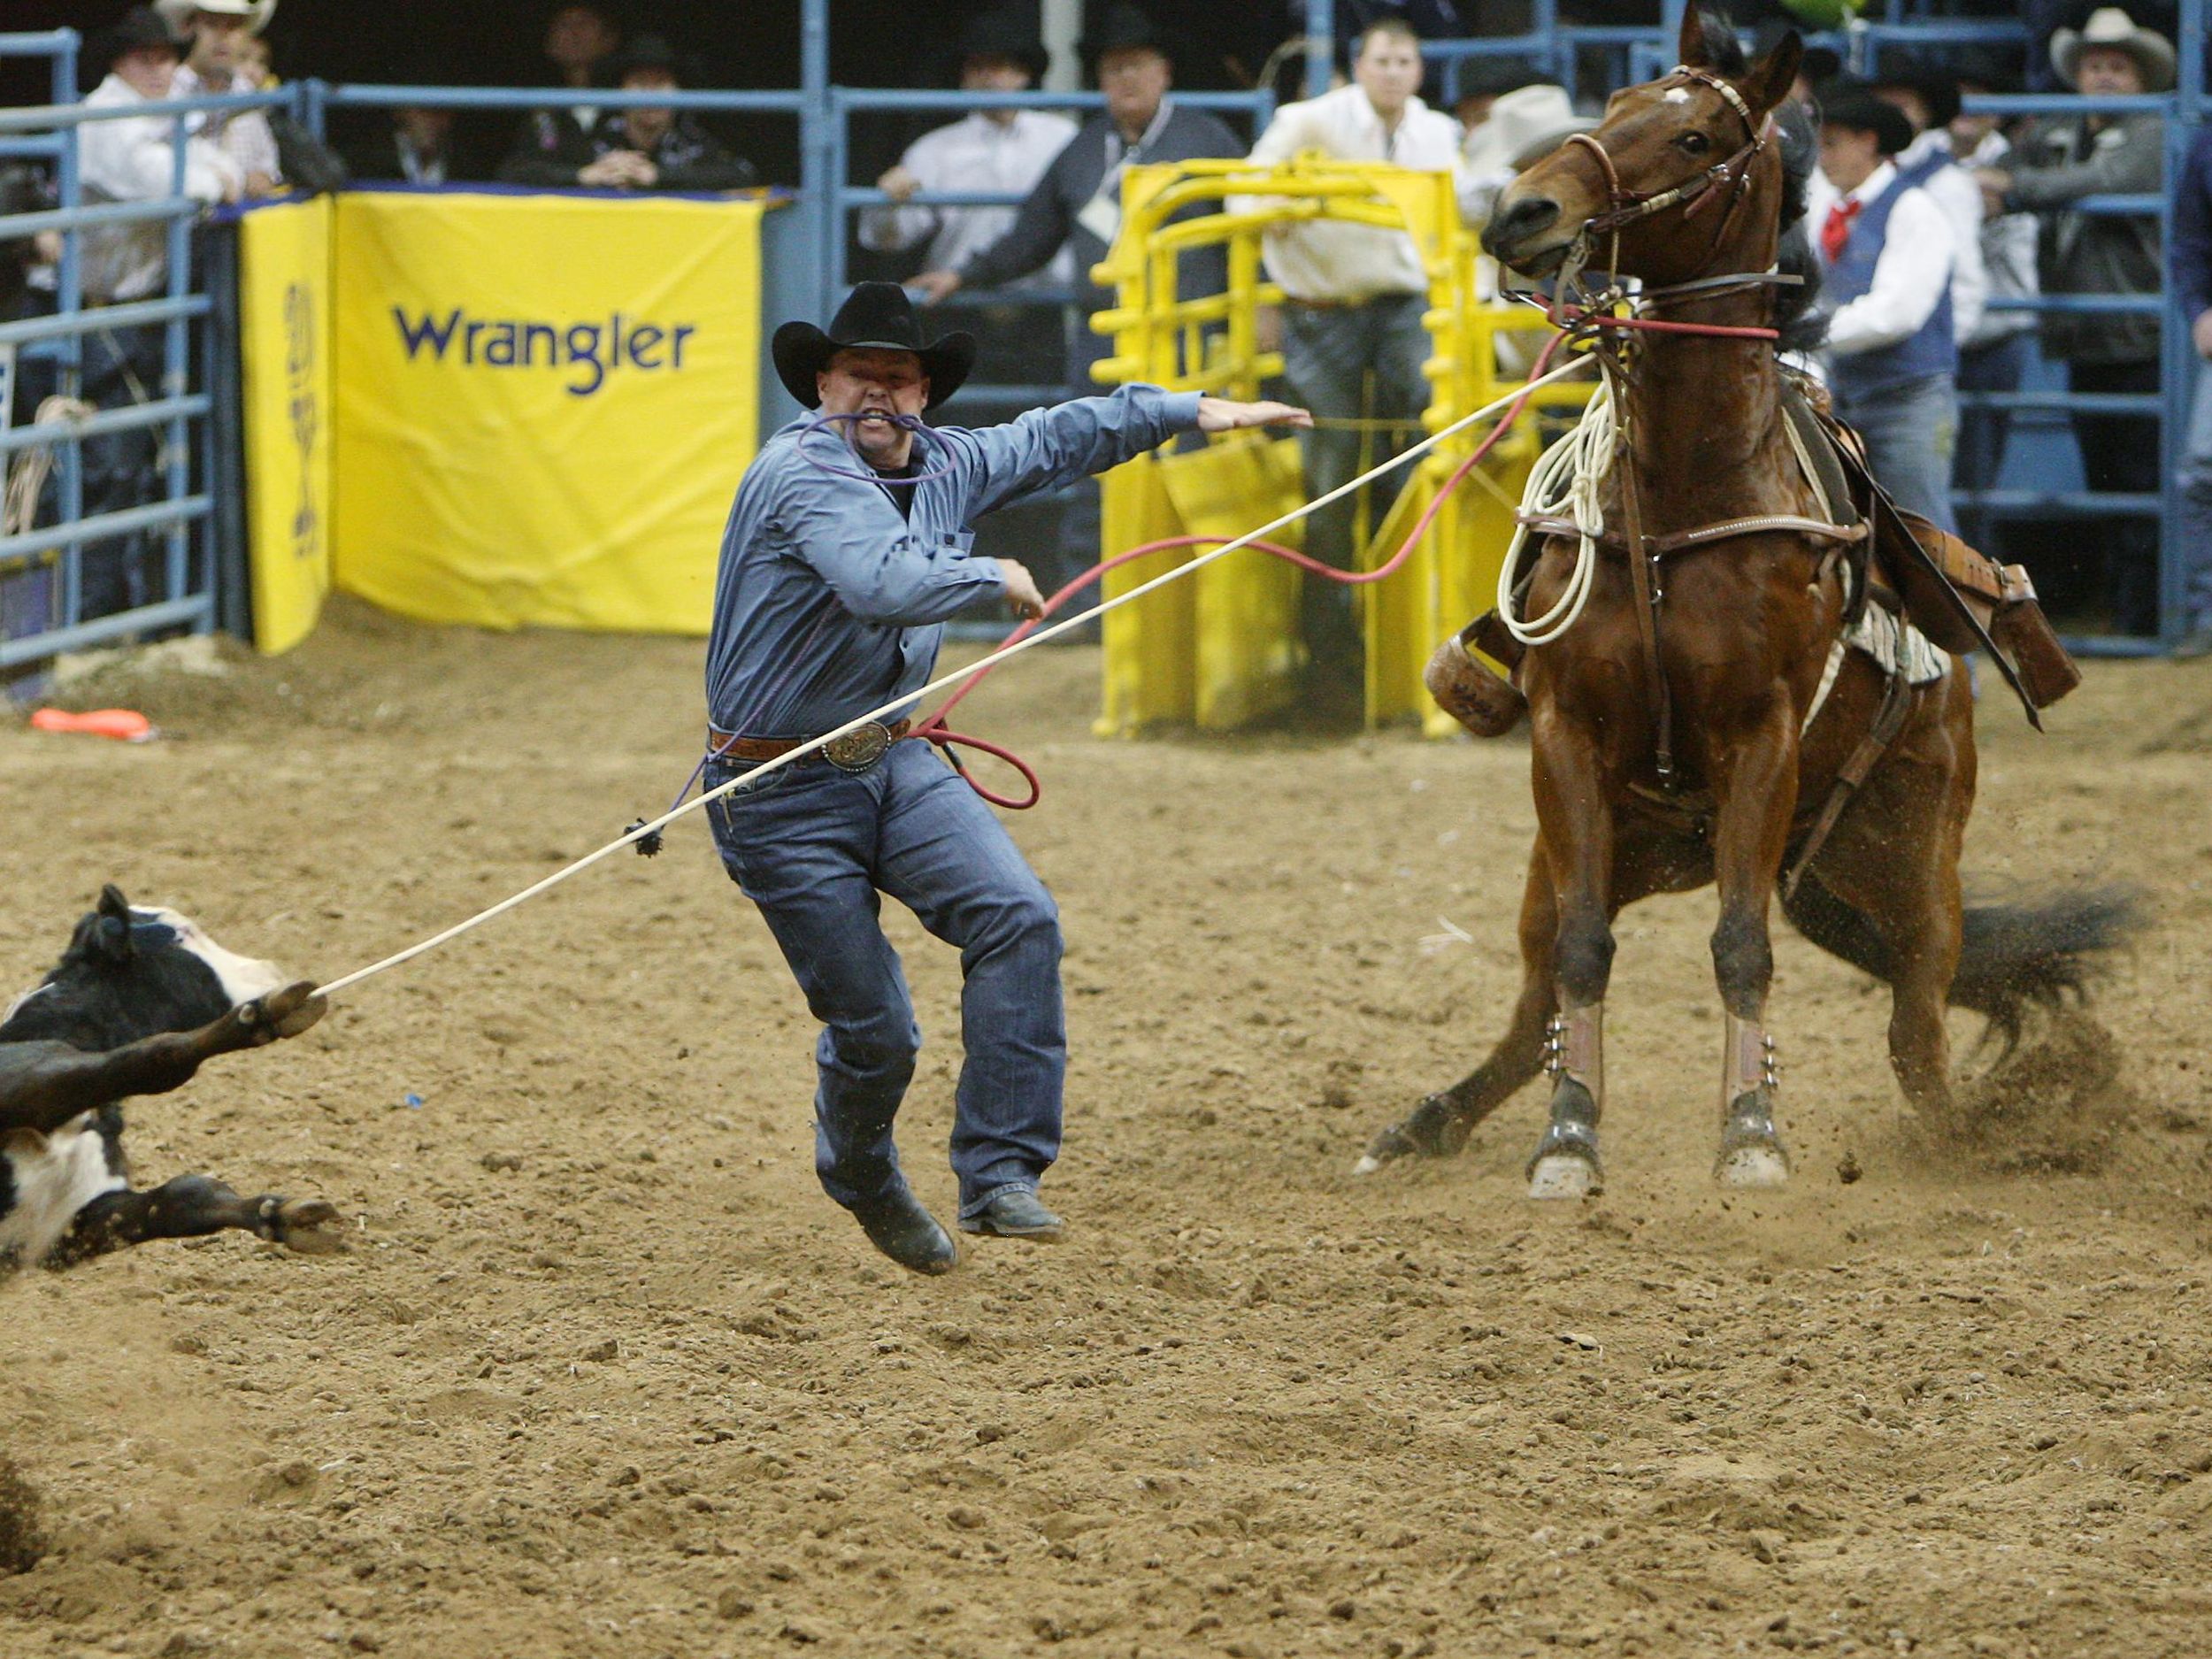 Three Area Cowboys Set To Compete At National Finals Rodeo In Las Vegas The Spokesman Review